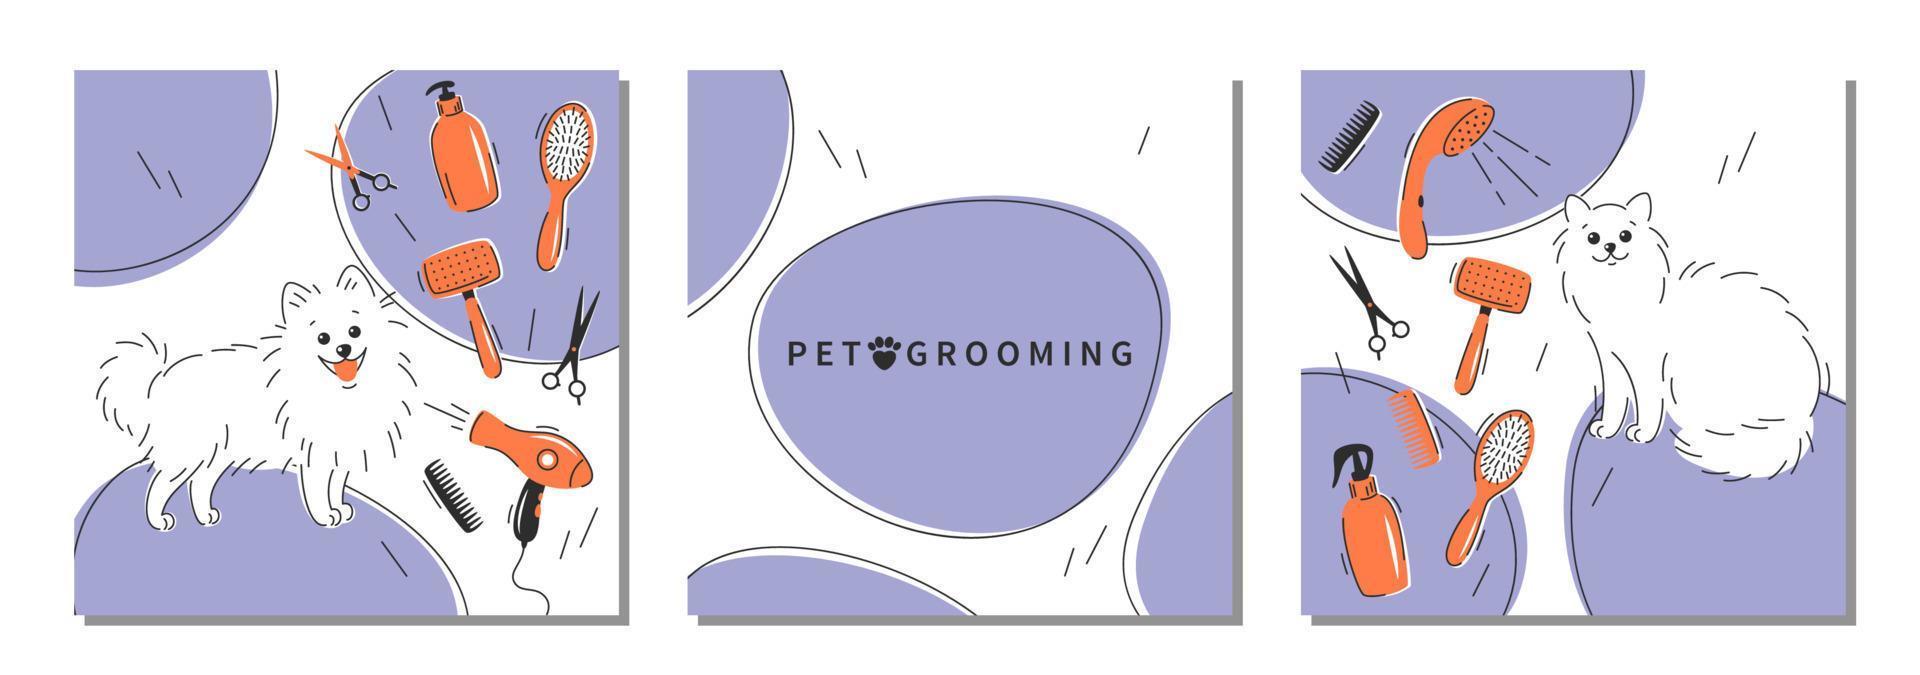 Set of design for pet care salon. Pet grooming. Cartoon dog and cat character with different tools for animal hair grooming. Vector illustration